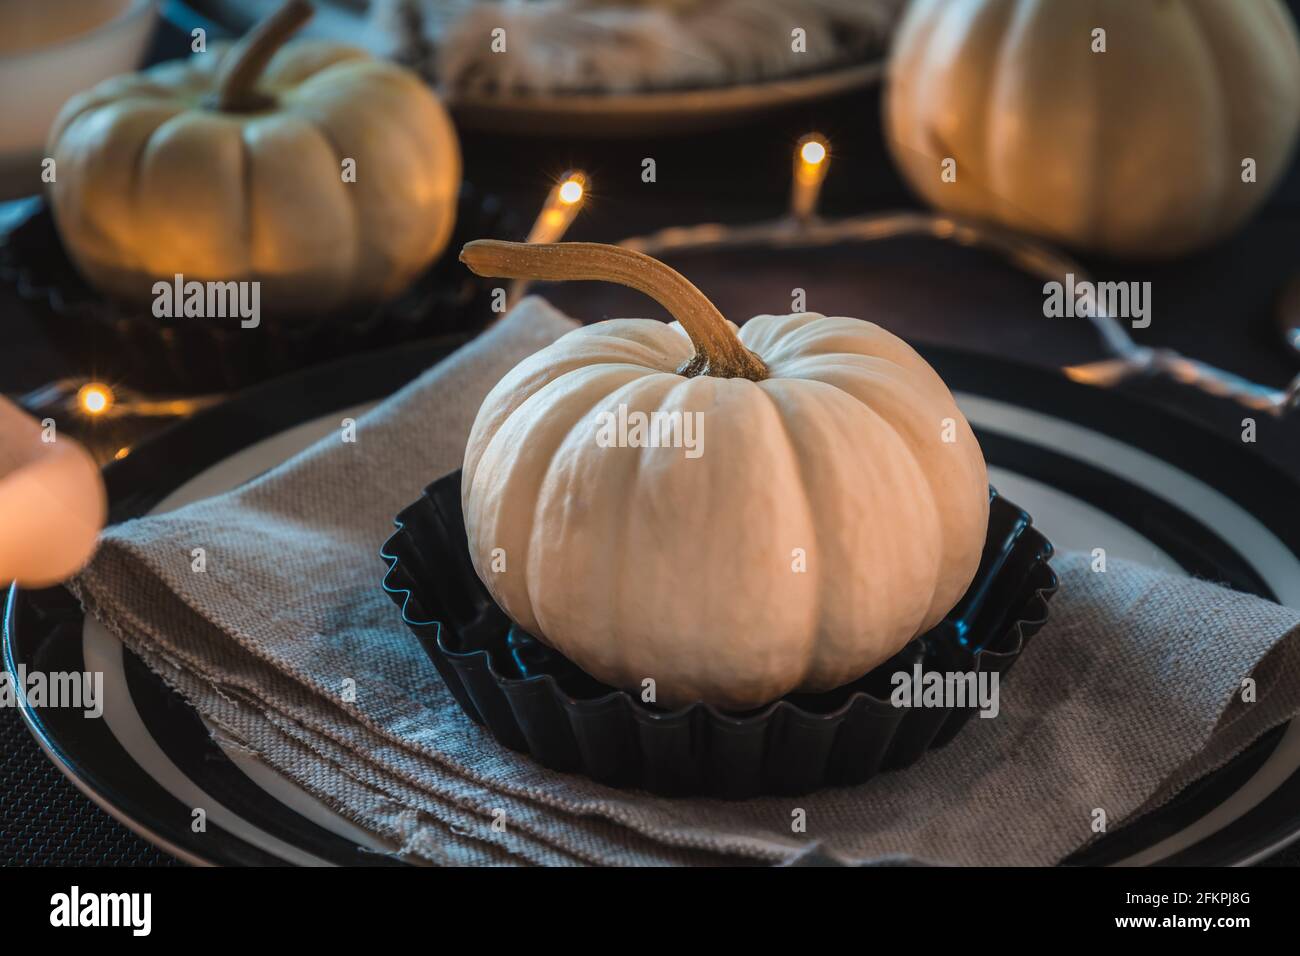 Place setting with a white mini pumpkin on a black and white decorated eating table Stock Photo